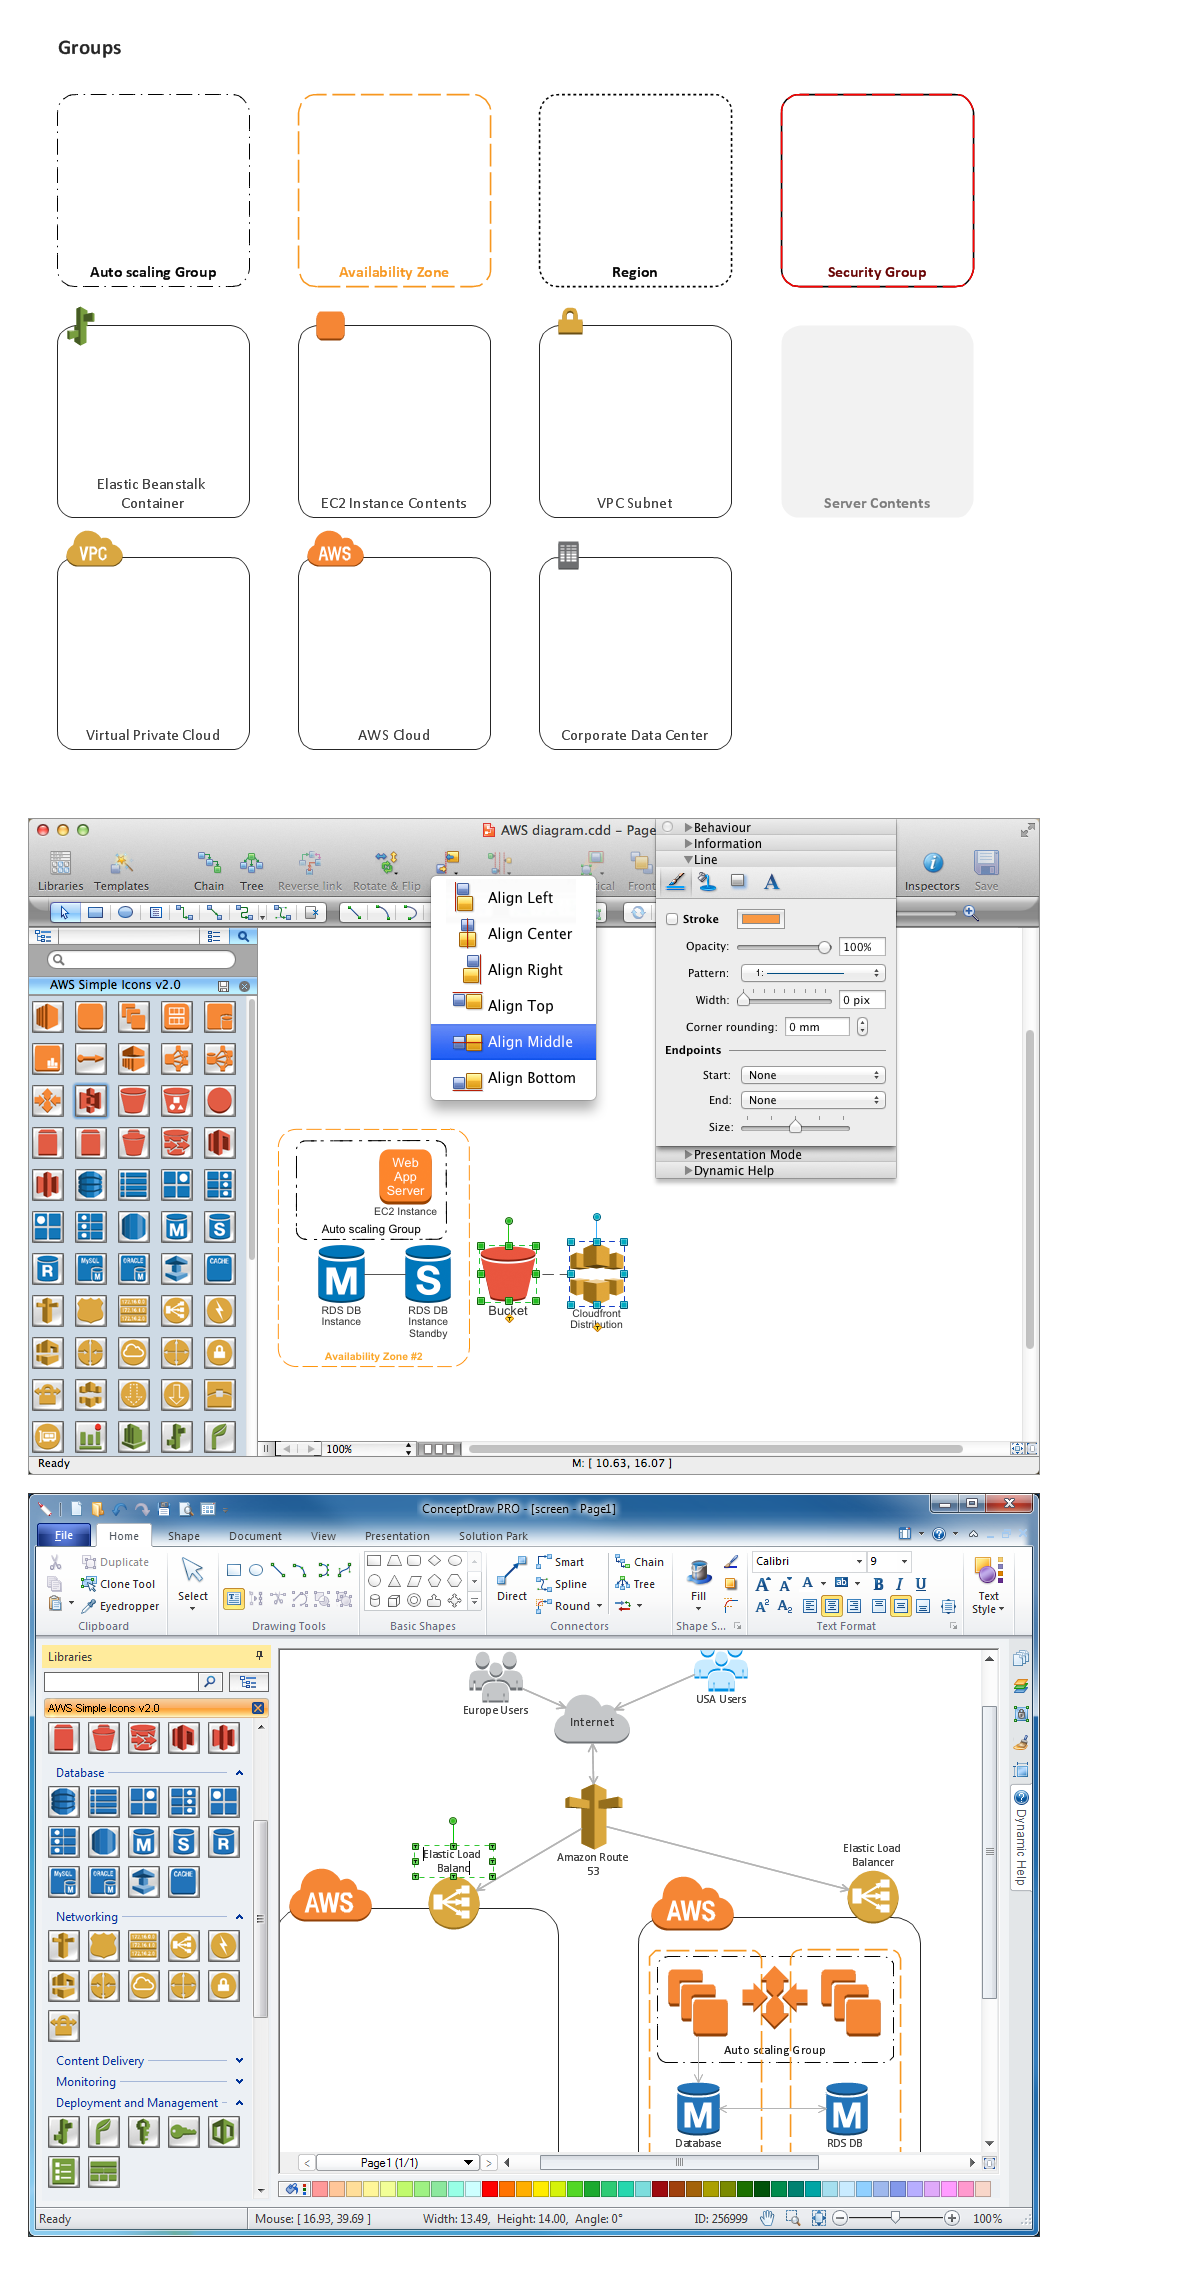 Amazon-Web-Services-AWS-Design-Elements-icons-Groups conceptdraw solution park web tool